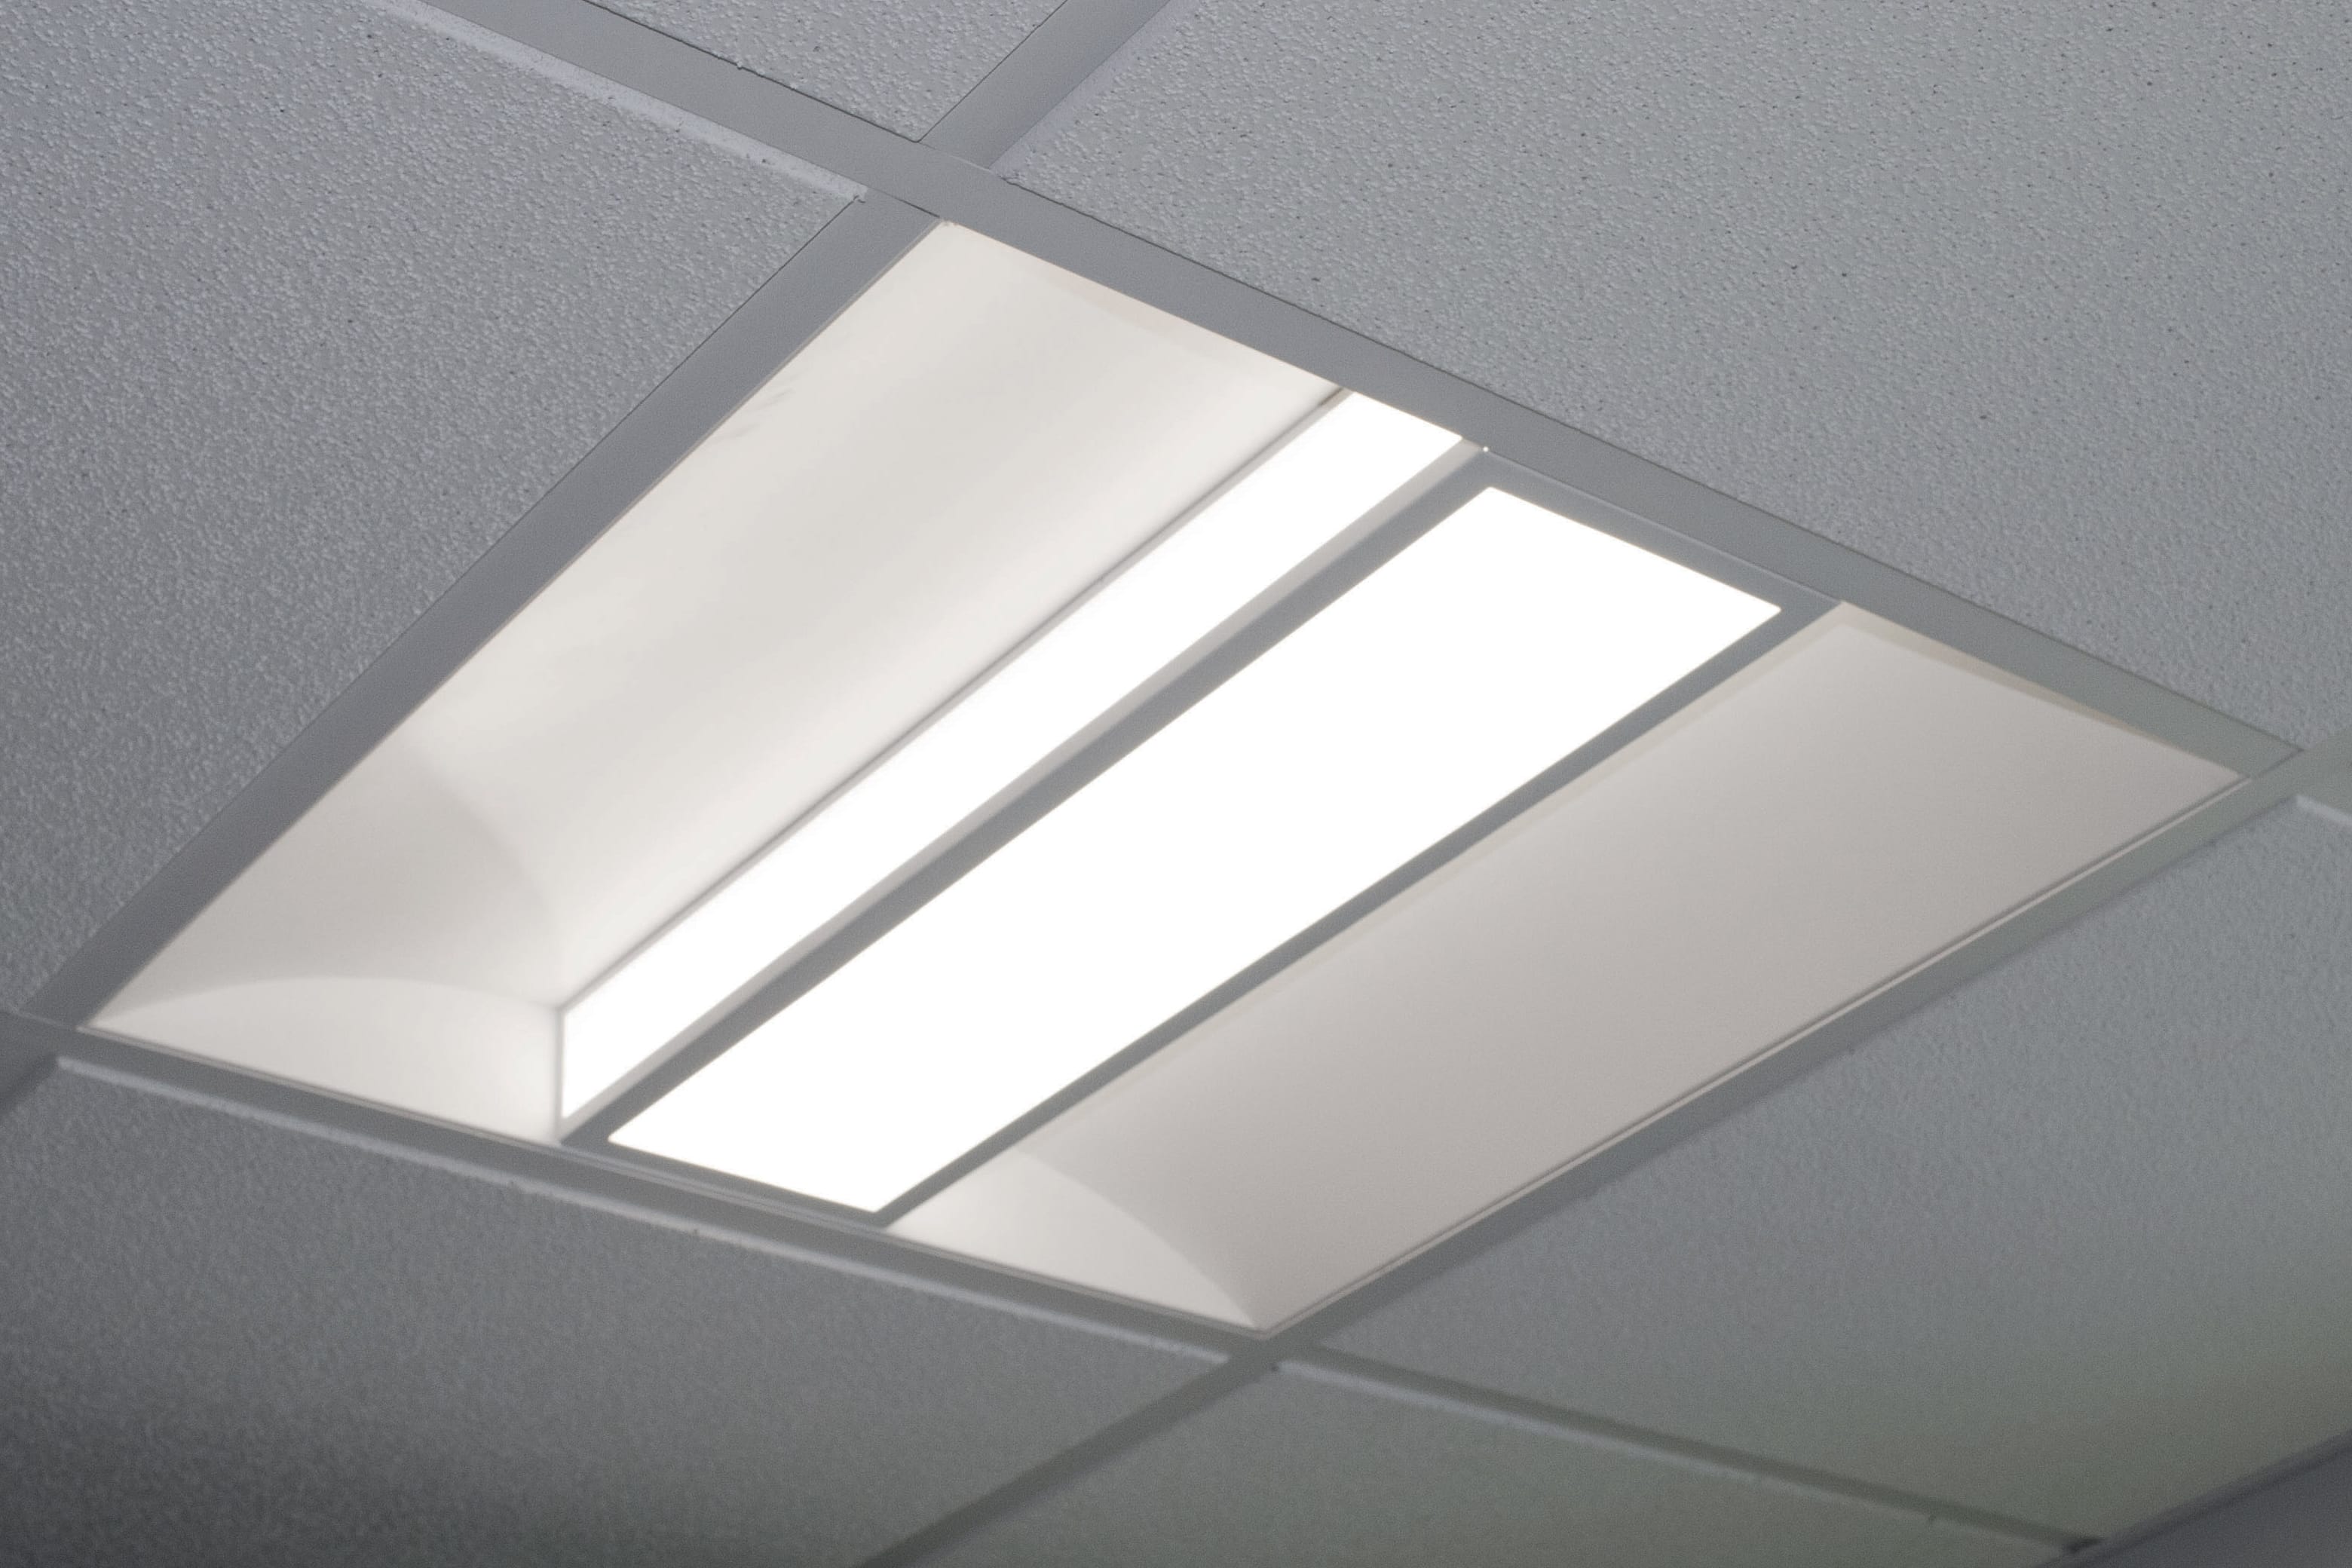 http://contrac-lighting.co.uk/wp-content/uploads/2018/01/S8-LIT-IN-CEILING.jpg